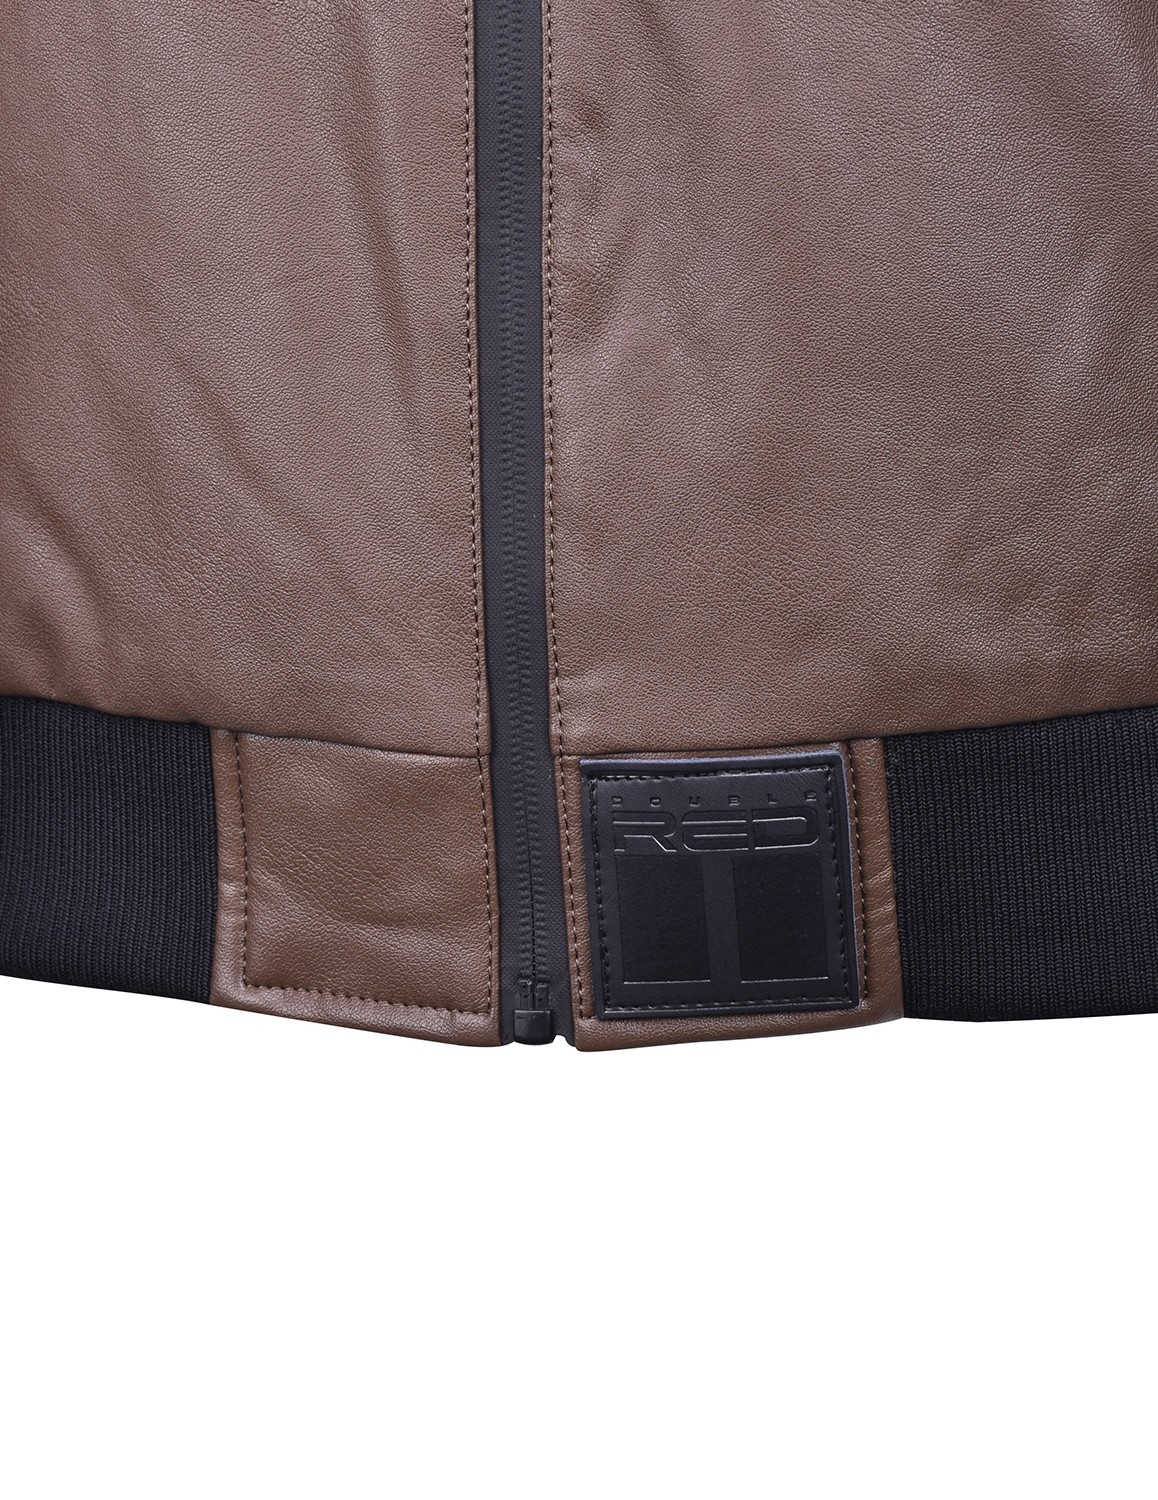 SOPRANO Leather Jacket Brown